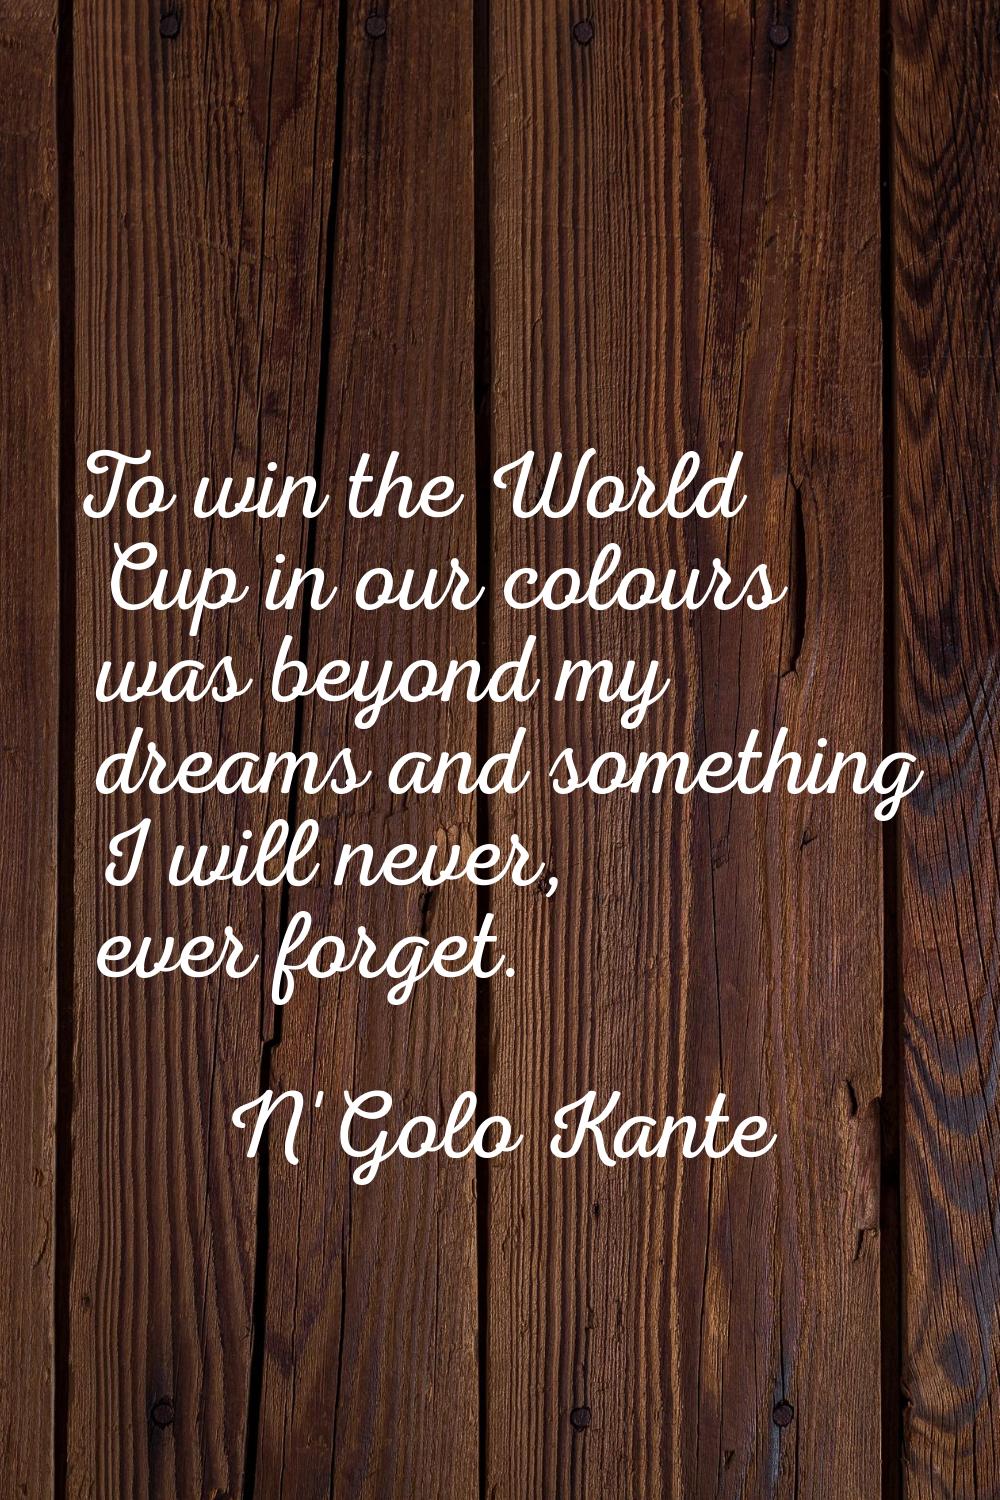 To win the World Cup in our colours was beyond my dreams and something I will never, ever forget.